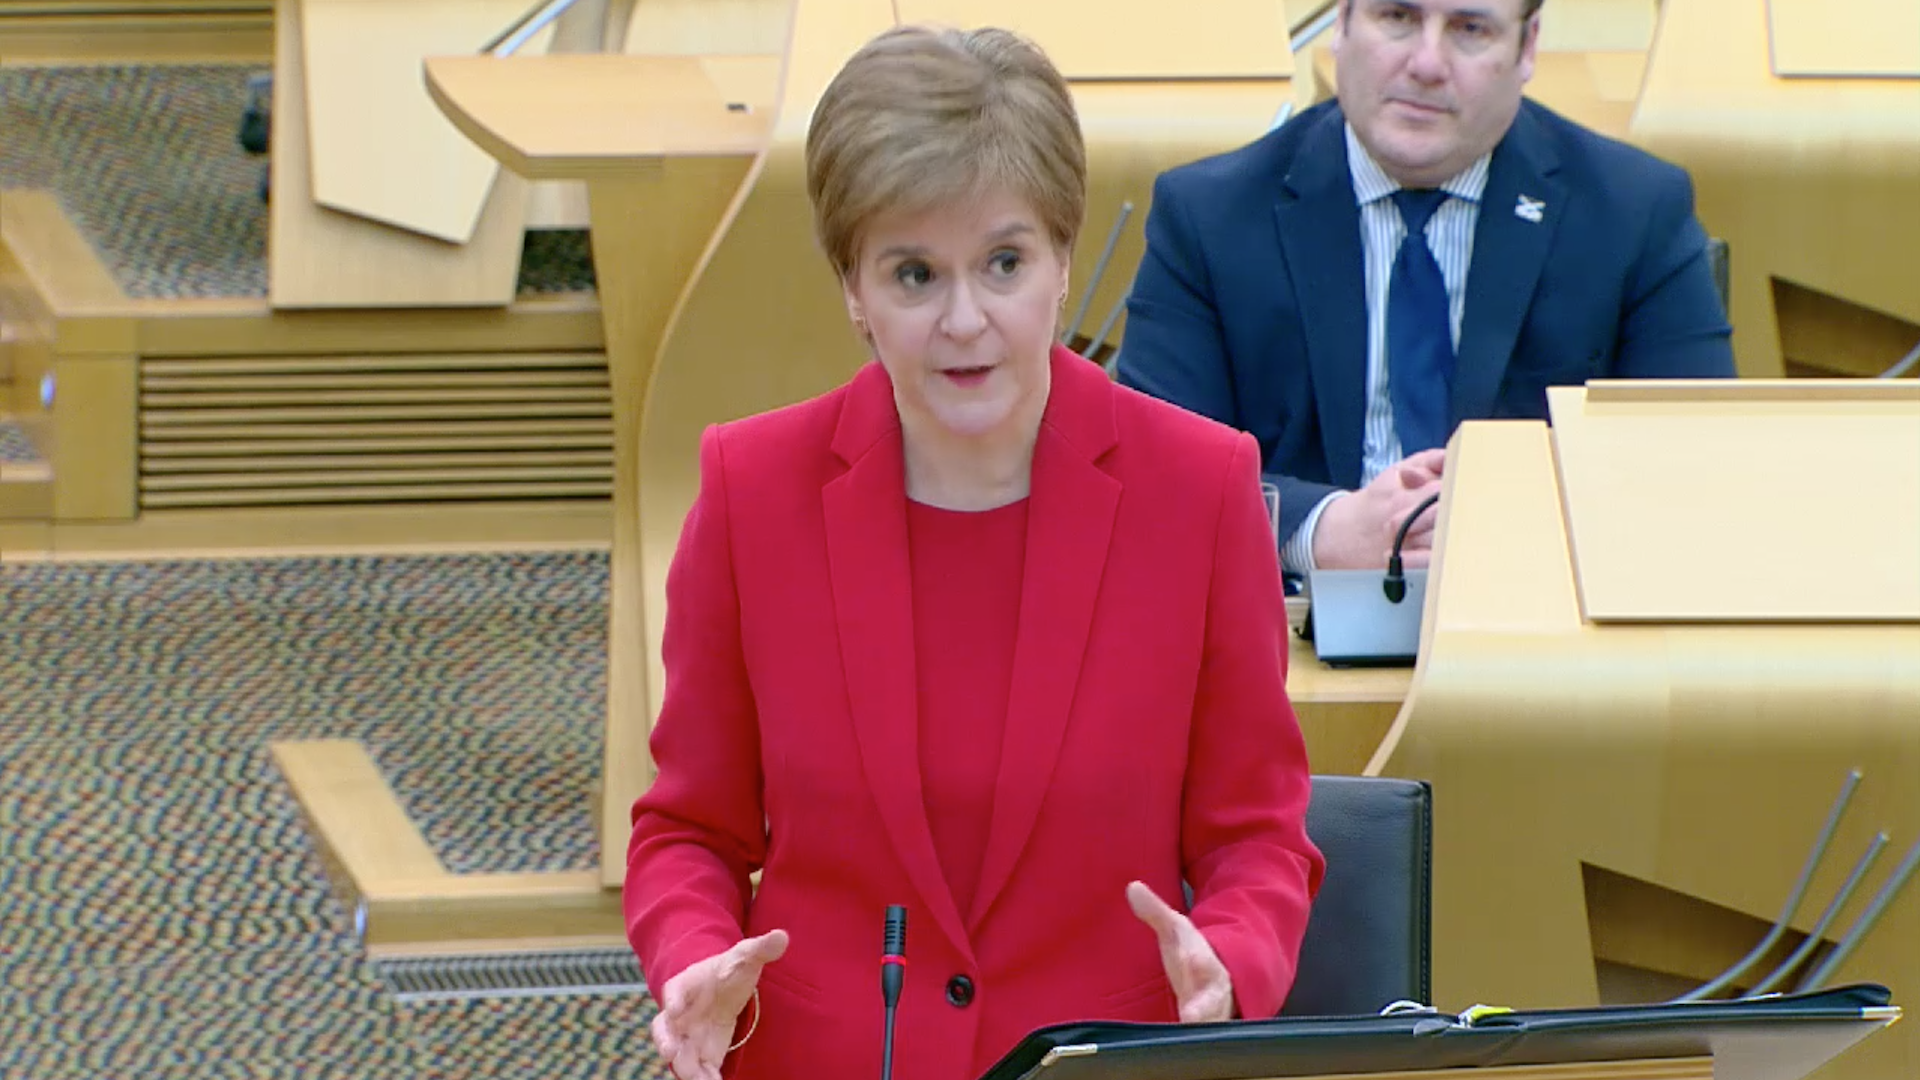 The First Minister was grilled on the SNP's child poverty plans